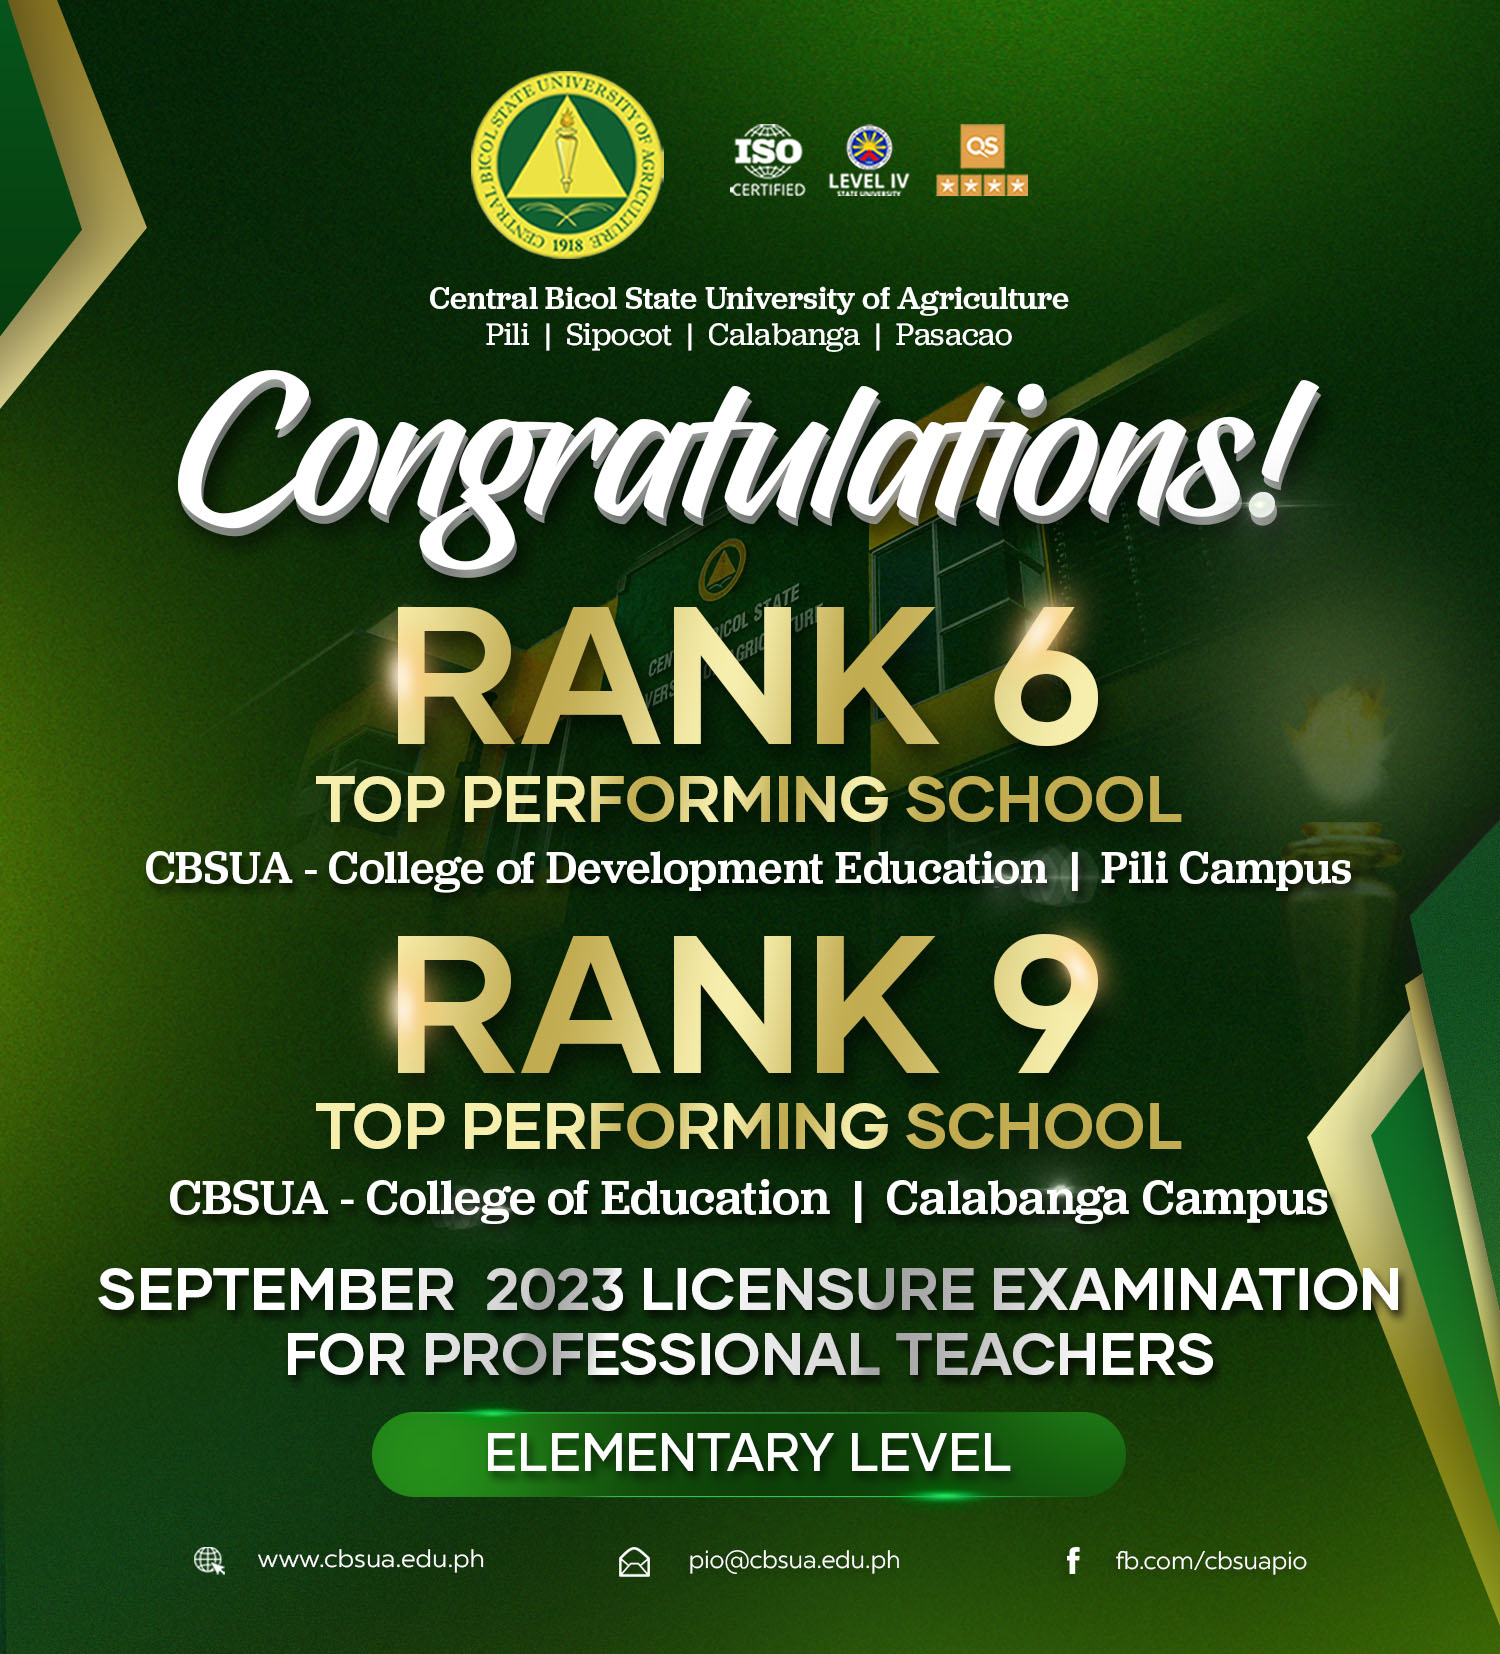 CBSUA ACHIEVES RANKINGS IN SEPTEMBER 2023 LICENSURE EXAMINATION FOR PROFESSIONAL TEACHERS – ELEMENTARY LEVEL